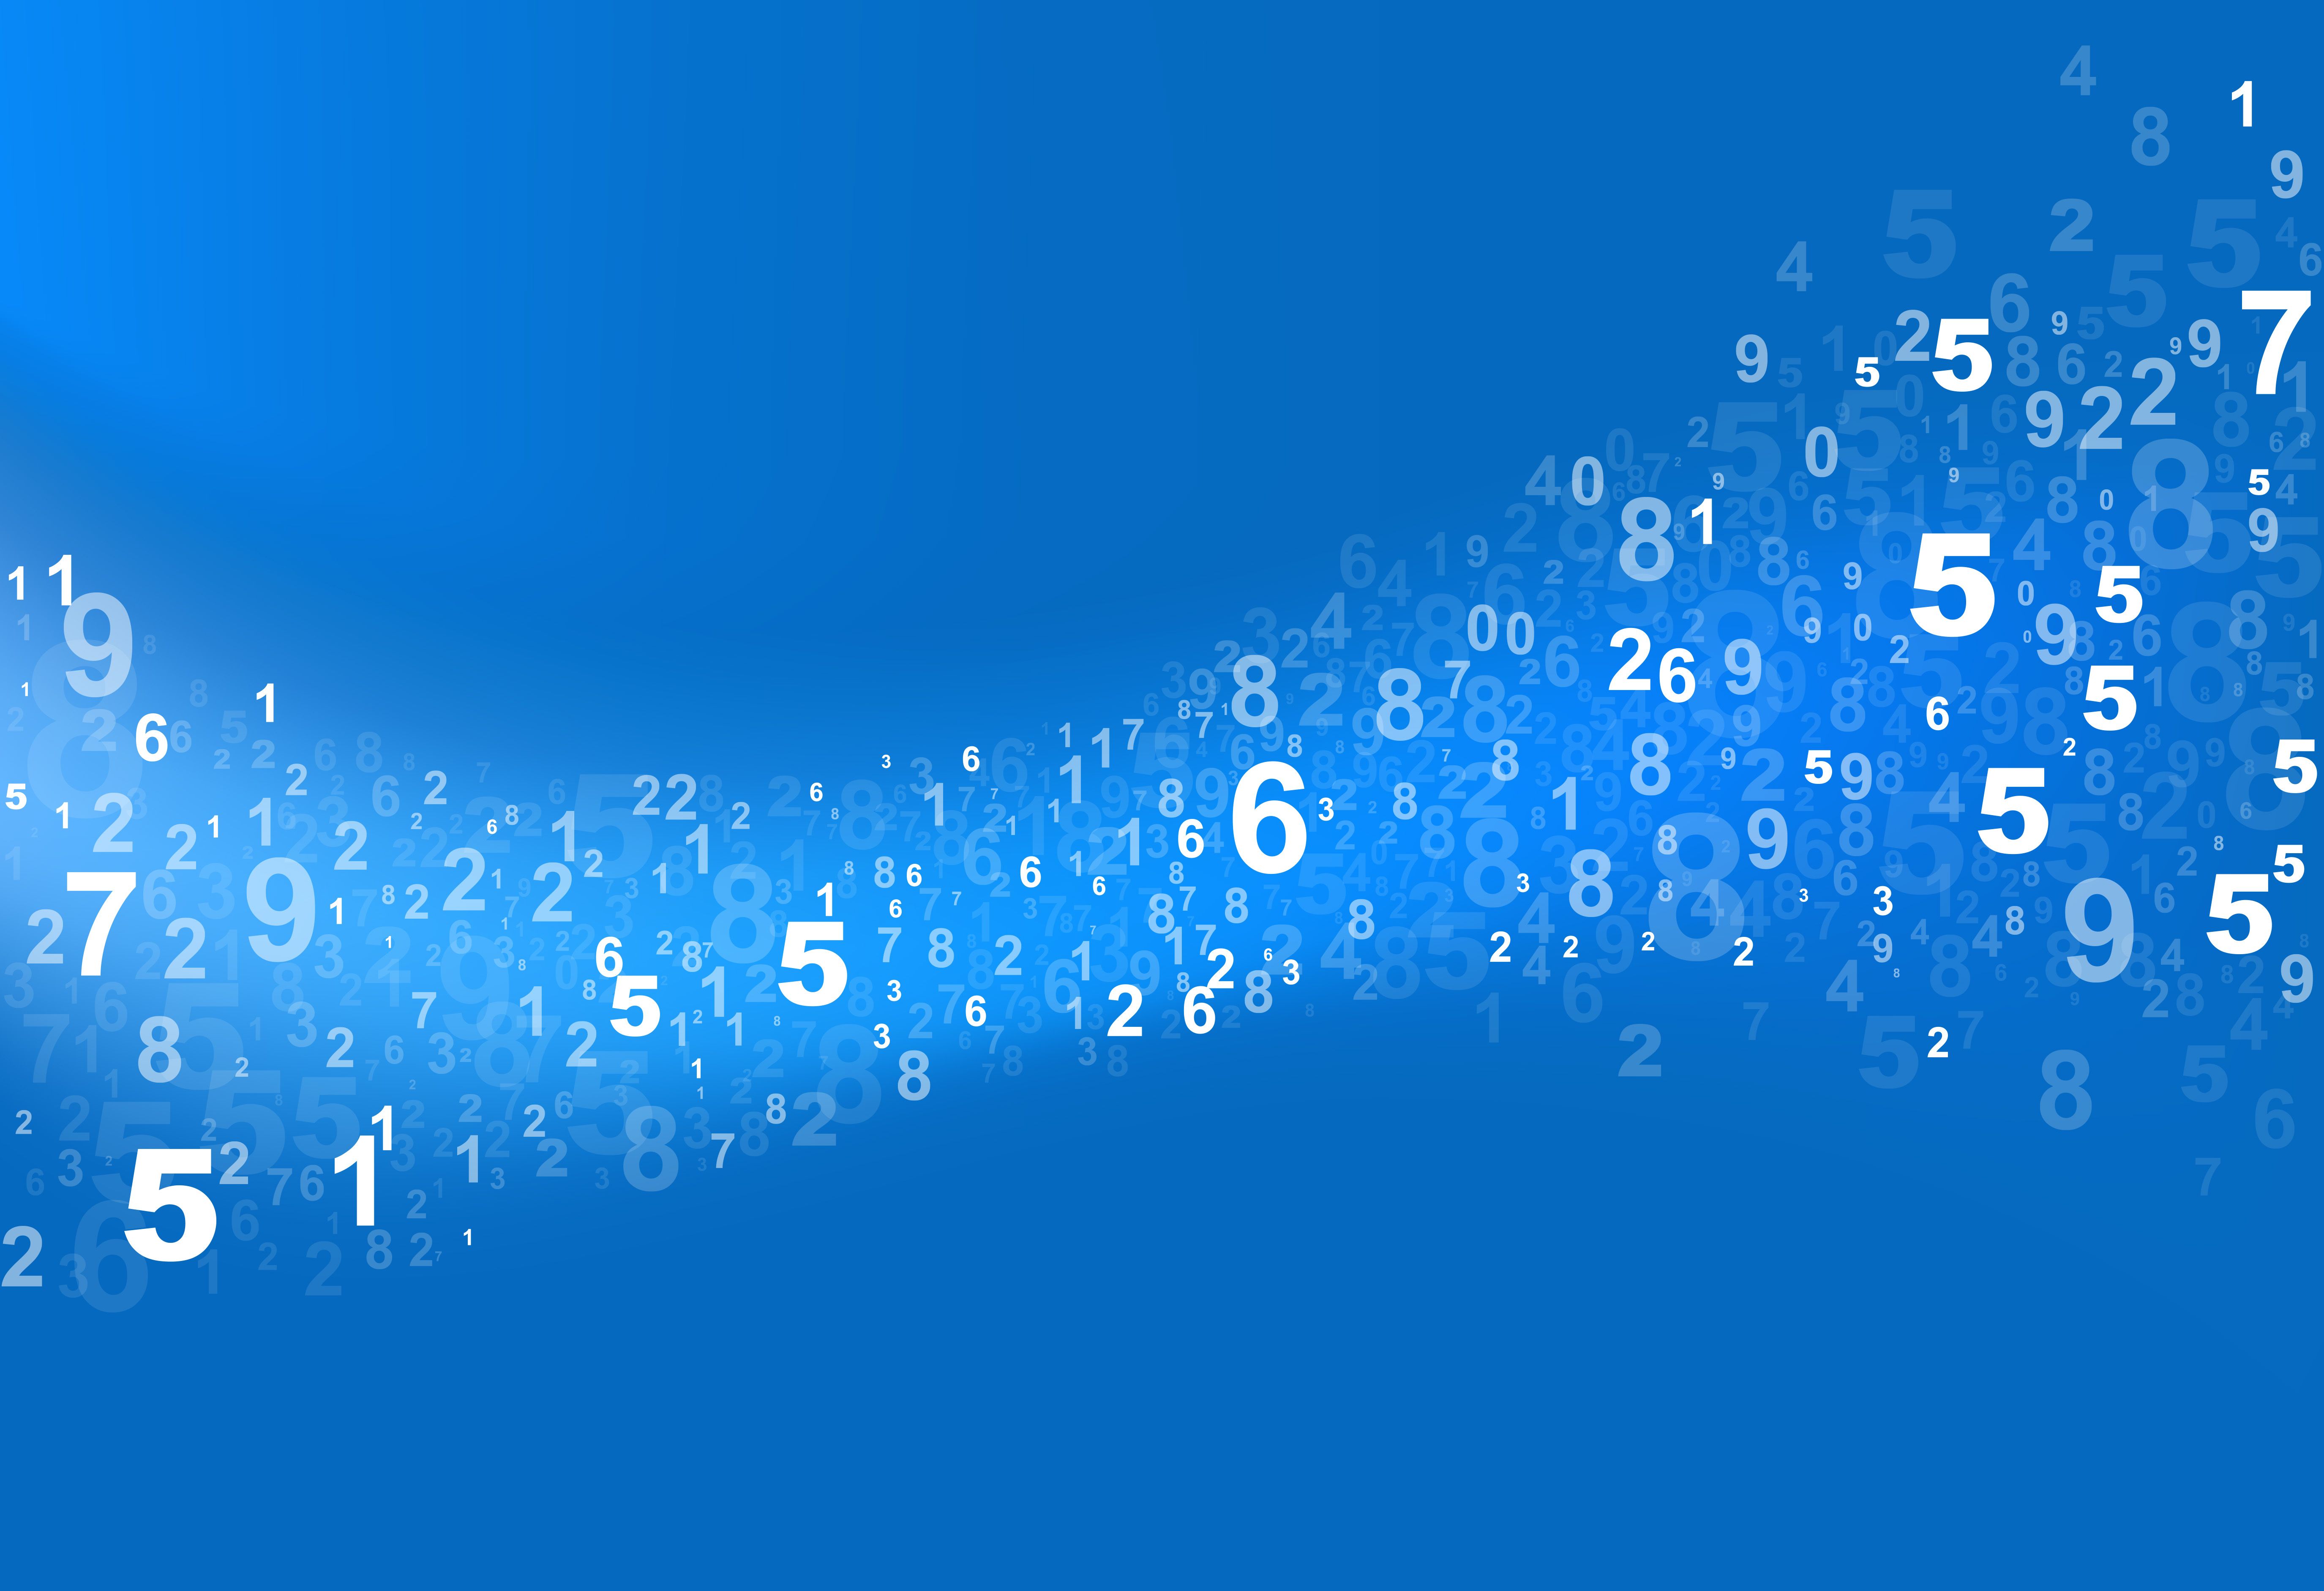 New Kind Of Prime Number Discovered Categories Of Prime Numbers